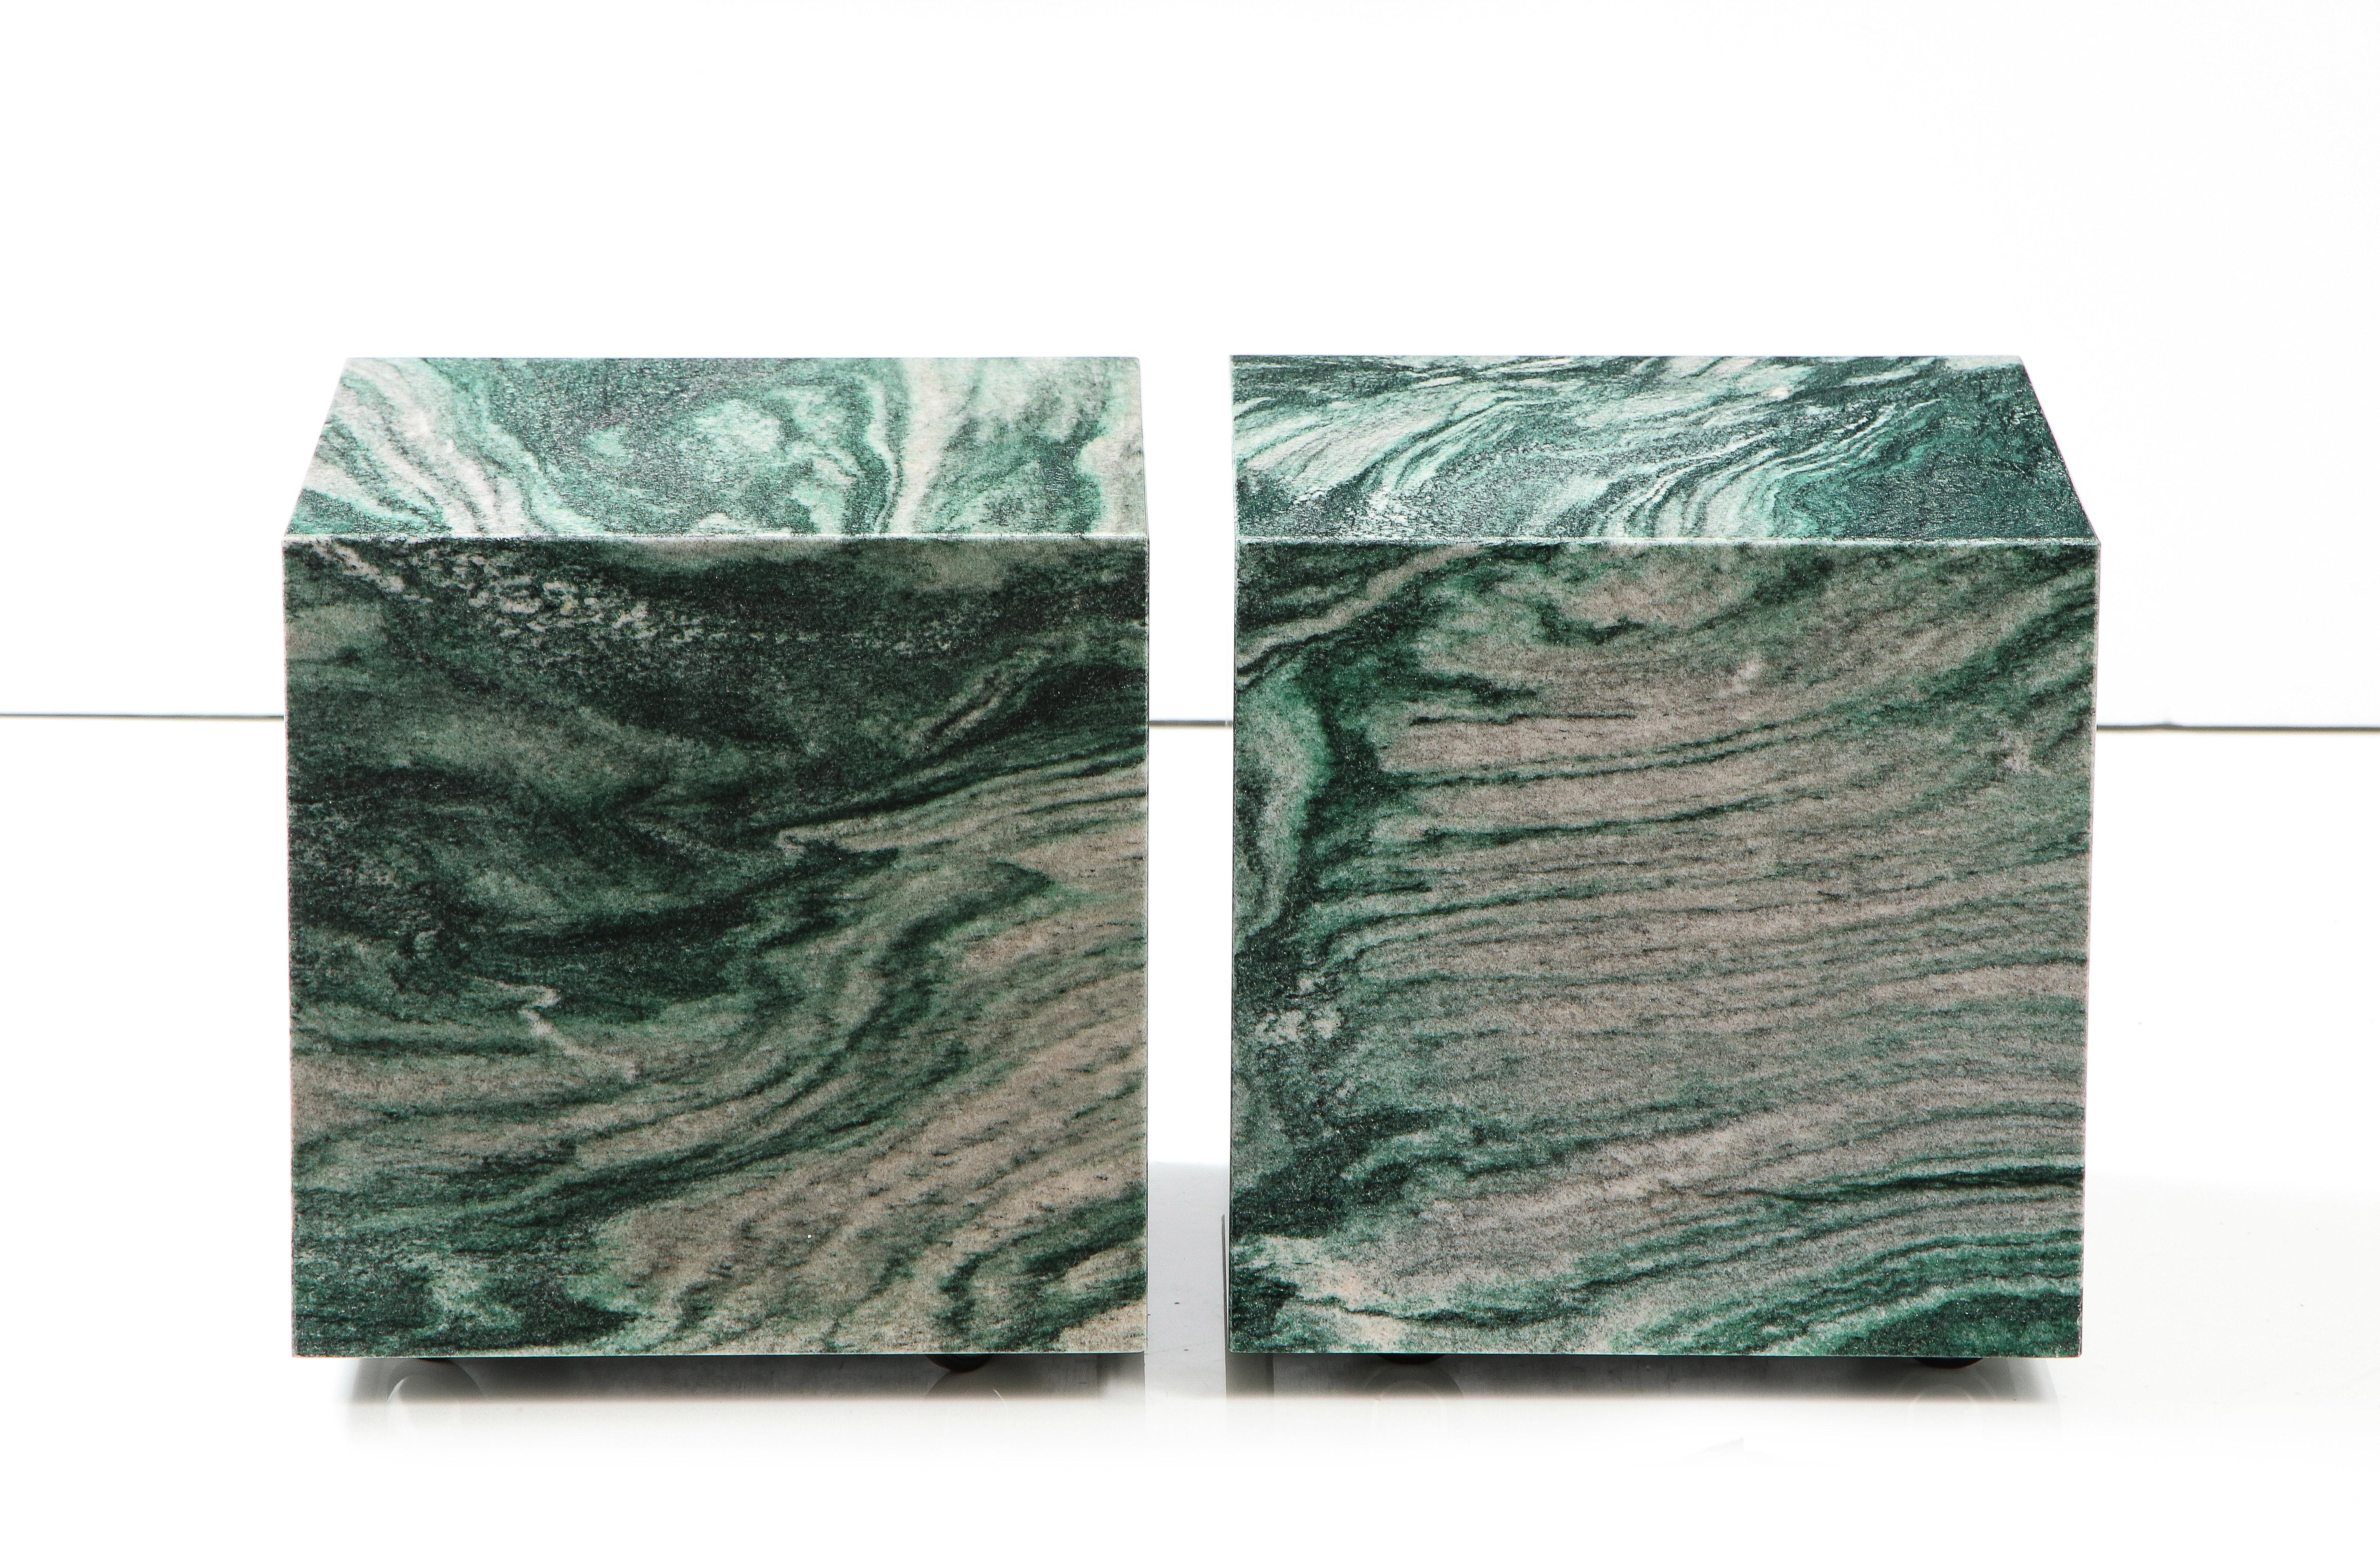 Stunning pair of Polar Verde marble cube tables.
The matched marble makes for a beautiful pair of end tables that are easily
moveable as they are on polished chrome casters.
They can also be used together as a coffee table.